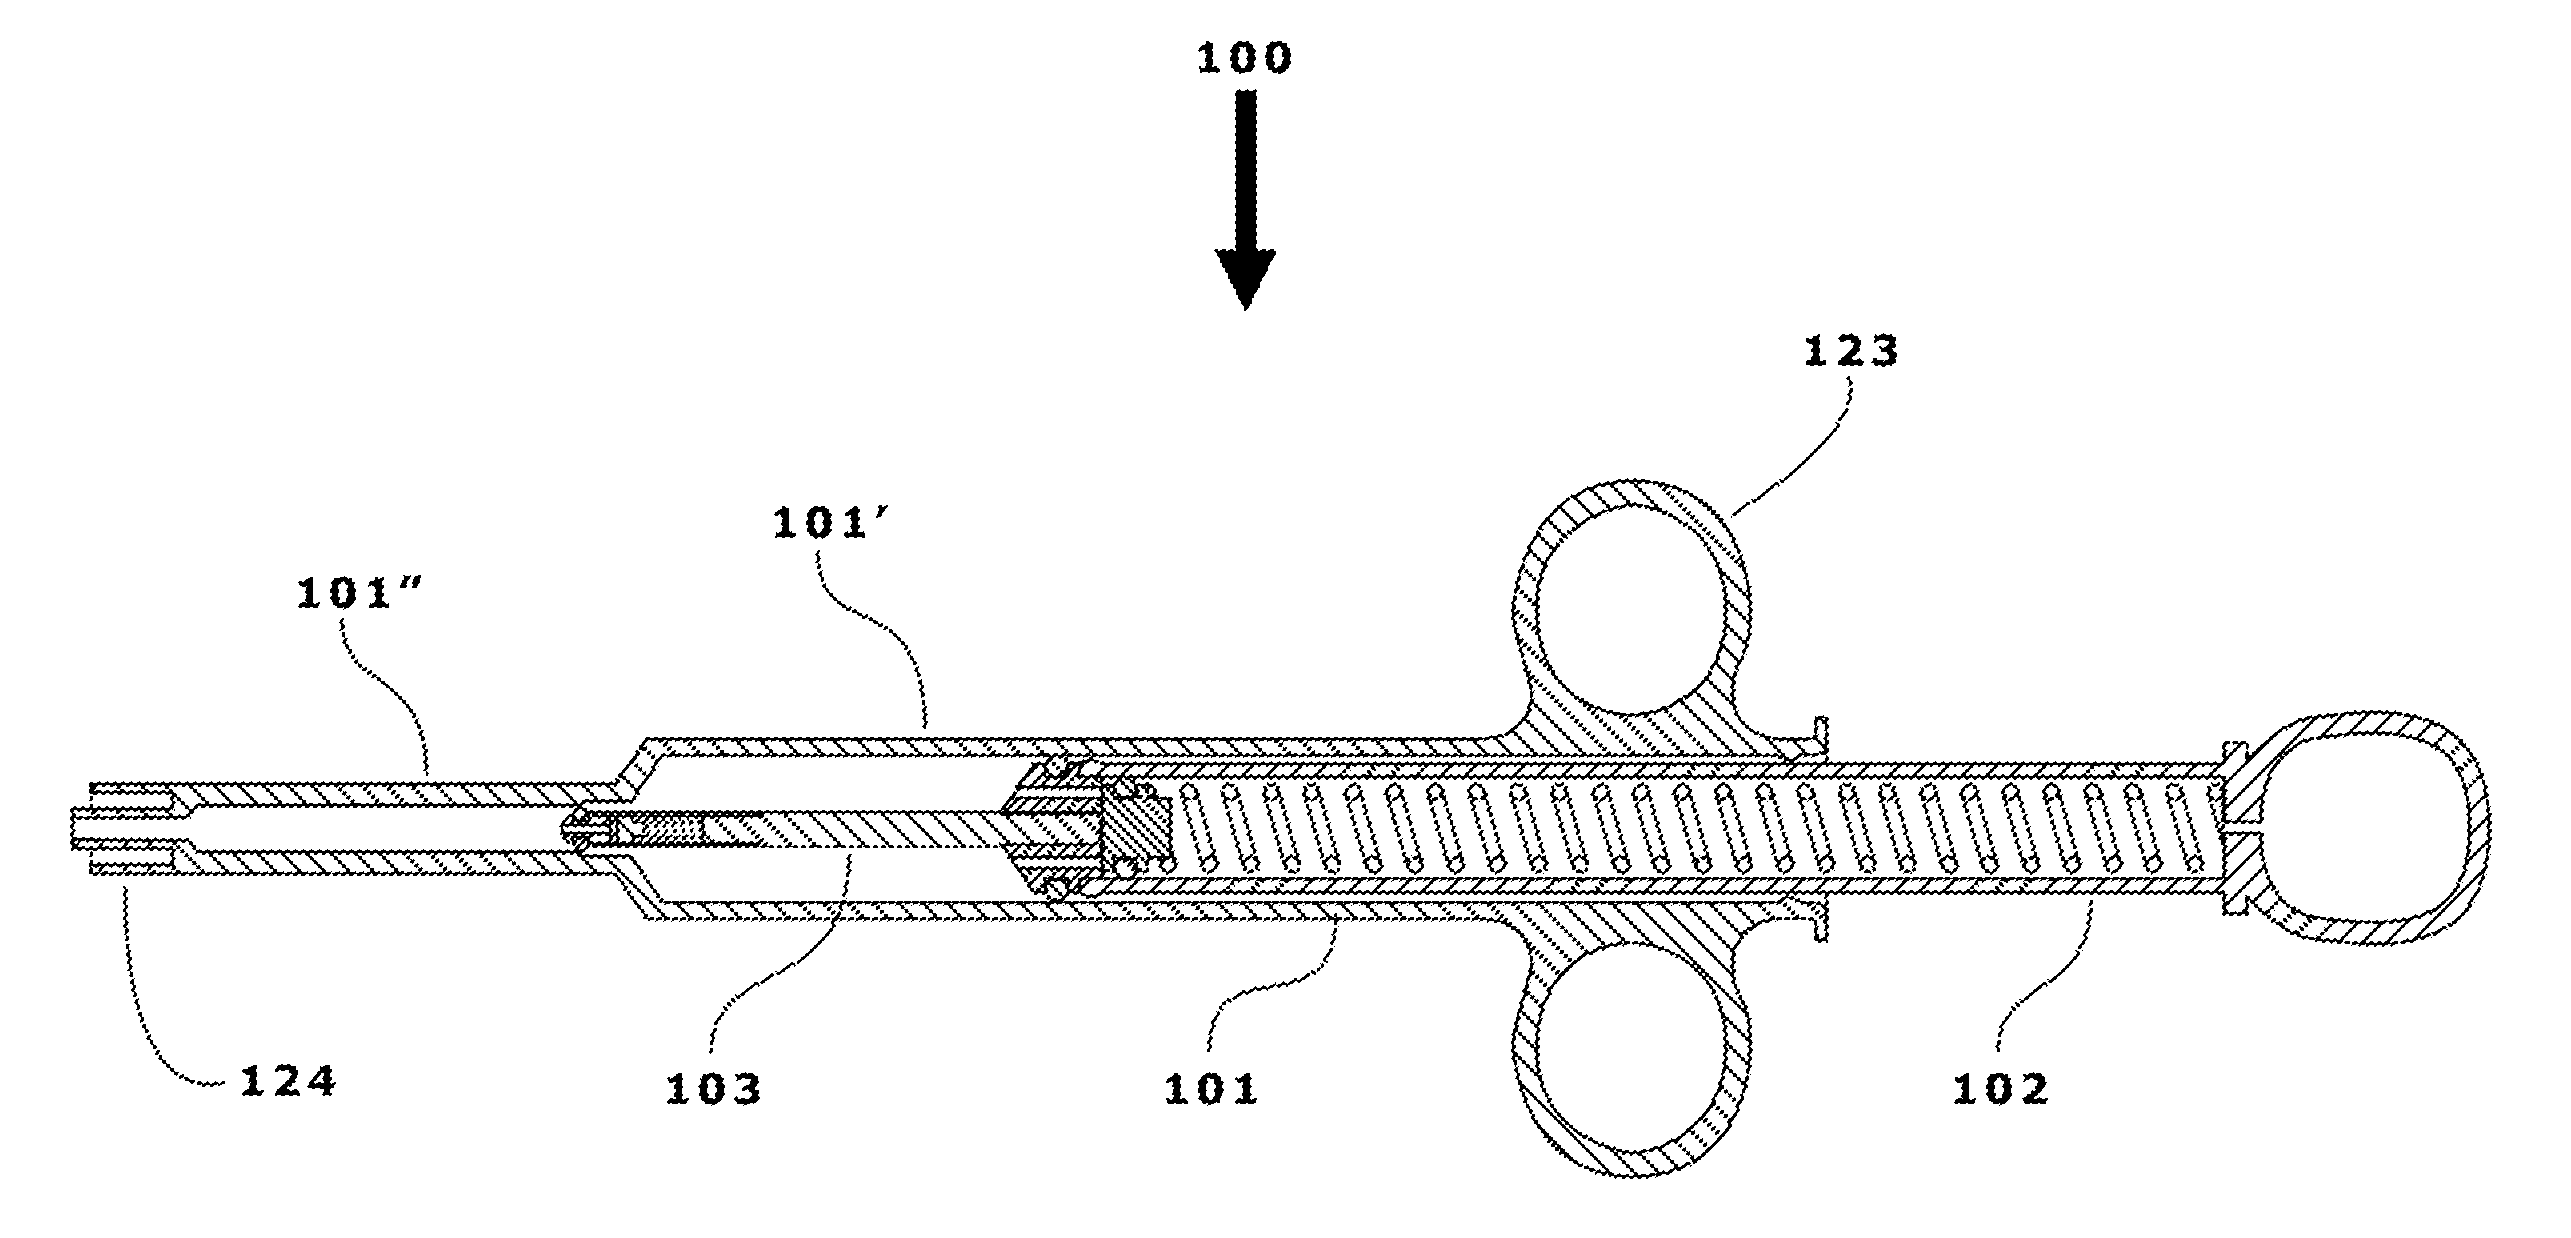 Apparatus and Methods for Inflating and Deflating Balloon Catheters